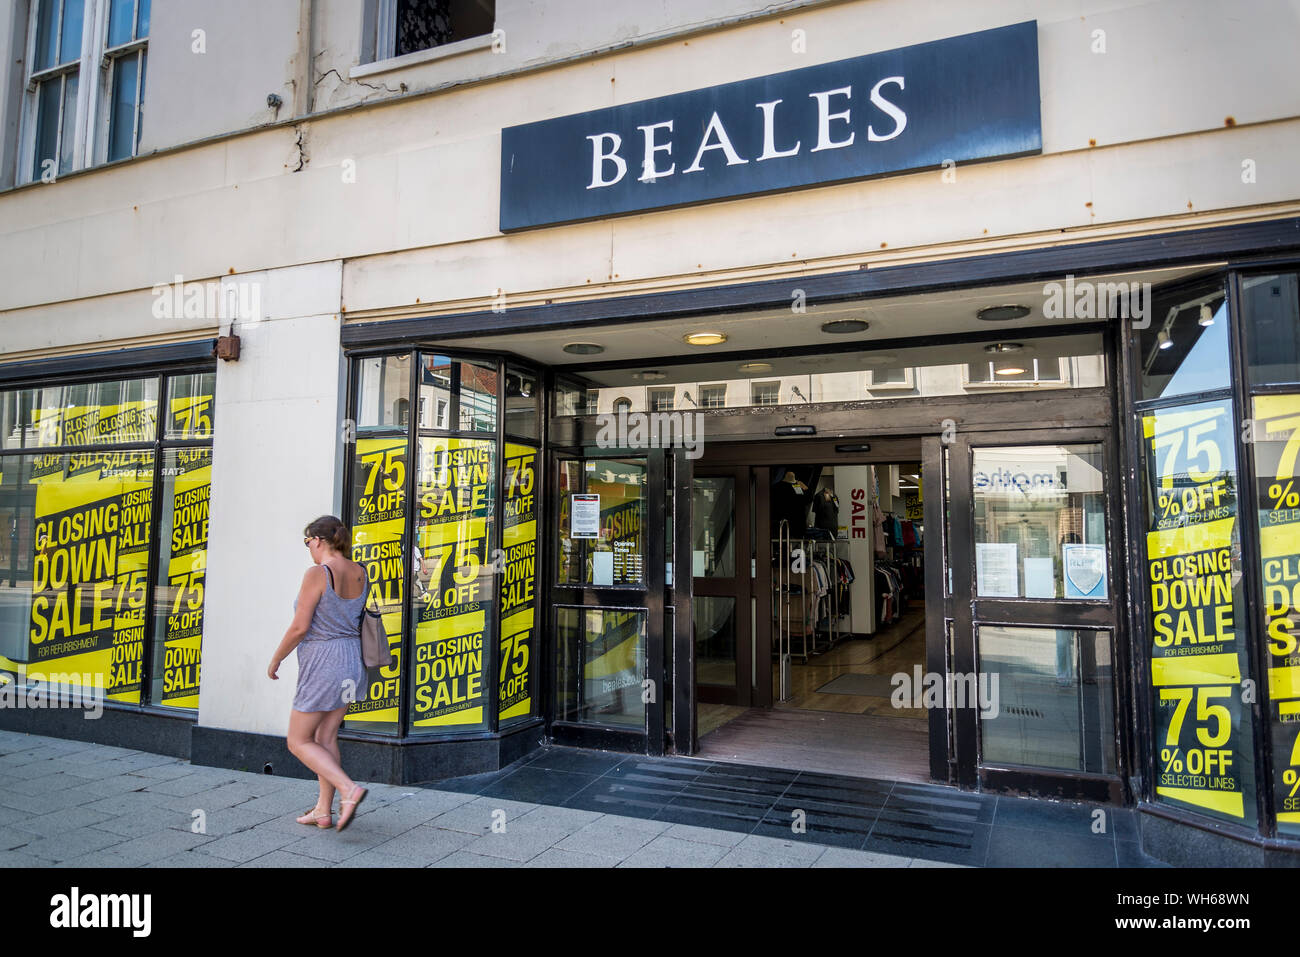 Closing down sales at Beales - department store chain, Worthing, West Sussex, England, UK Stock Photo